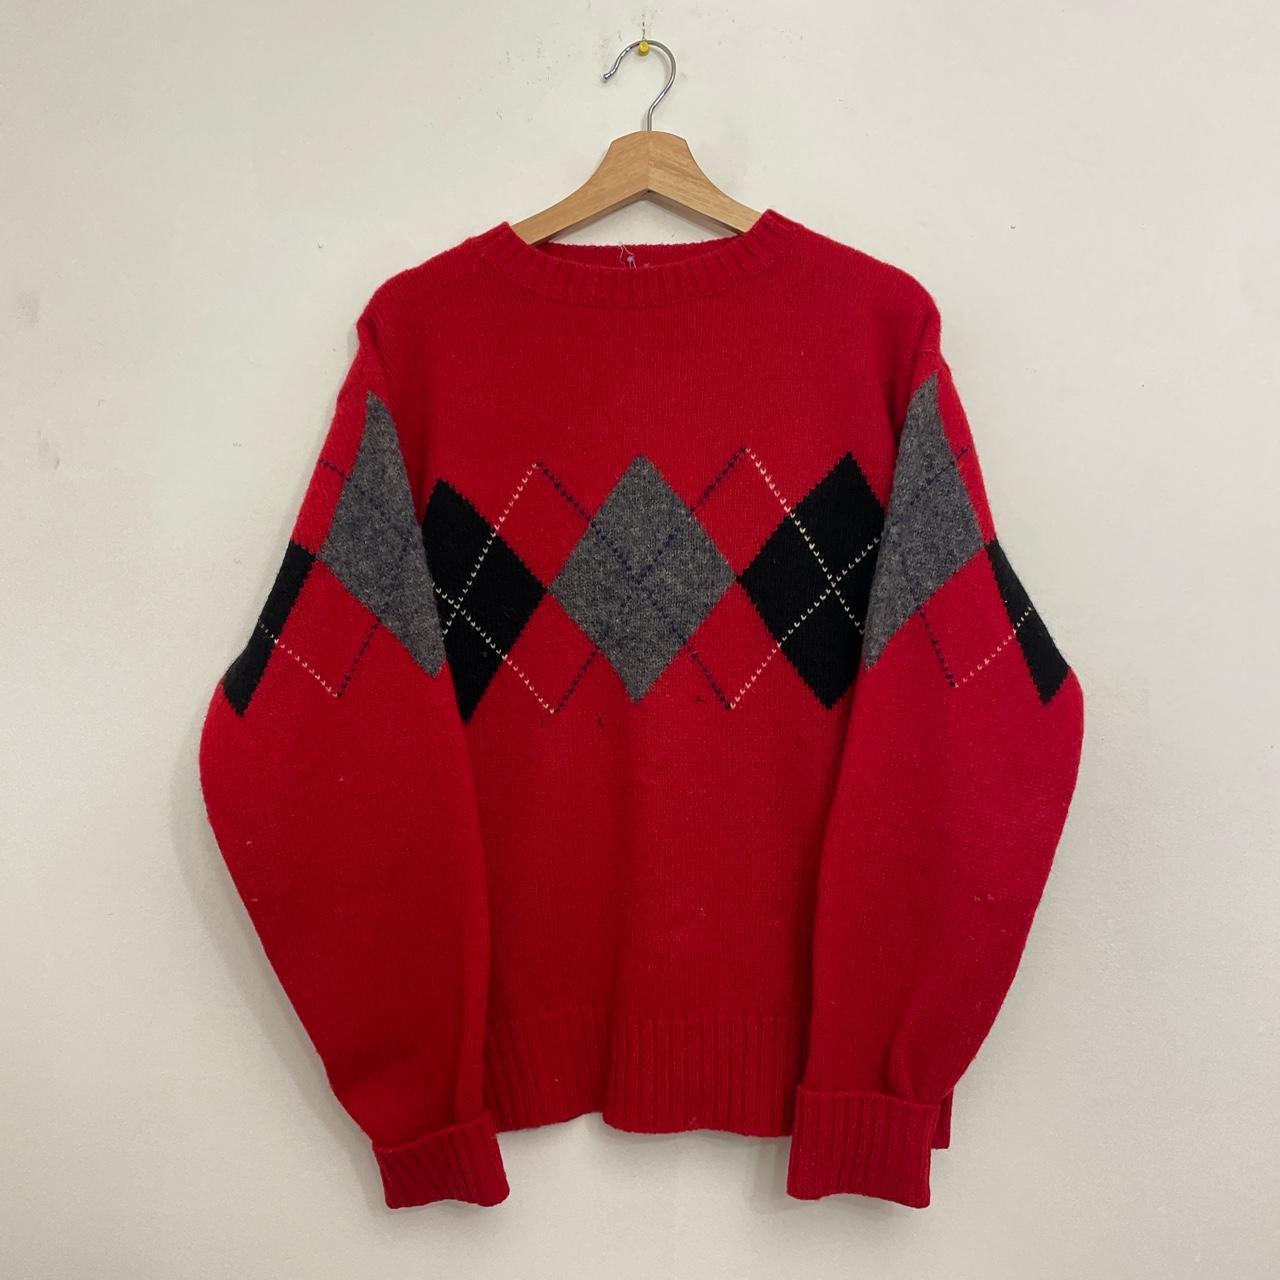 Vintage Christopher Hayes Sweater Nice Pattern and... - Depop